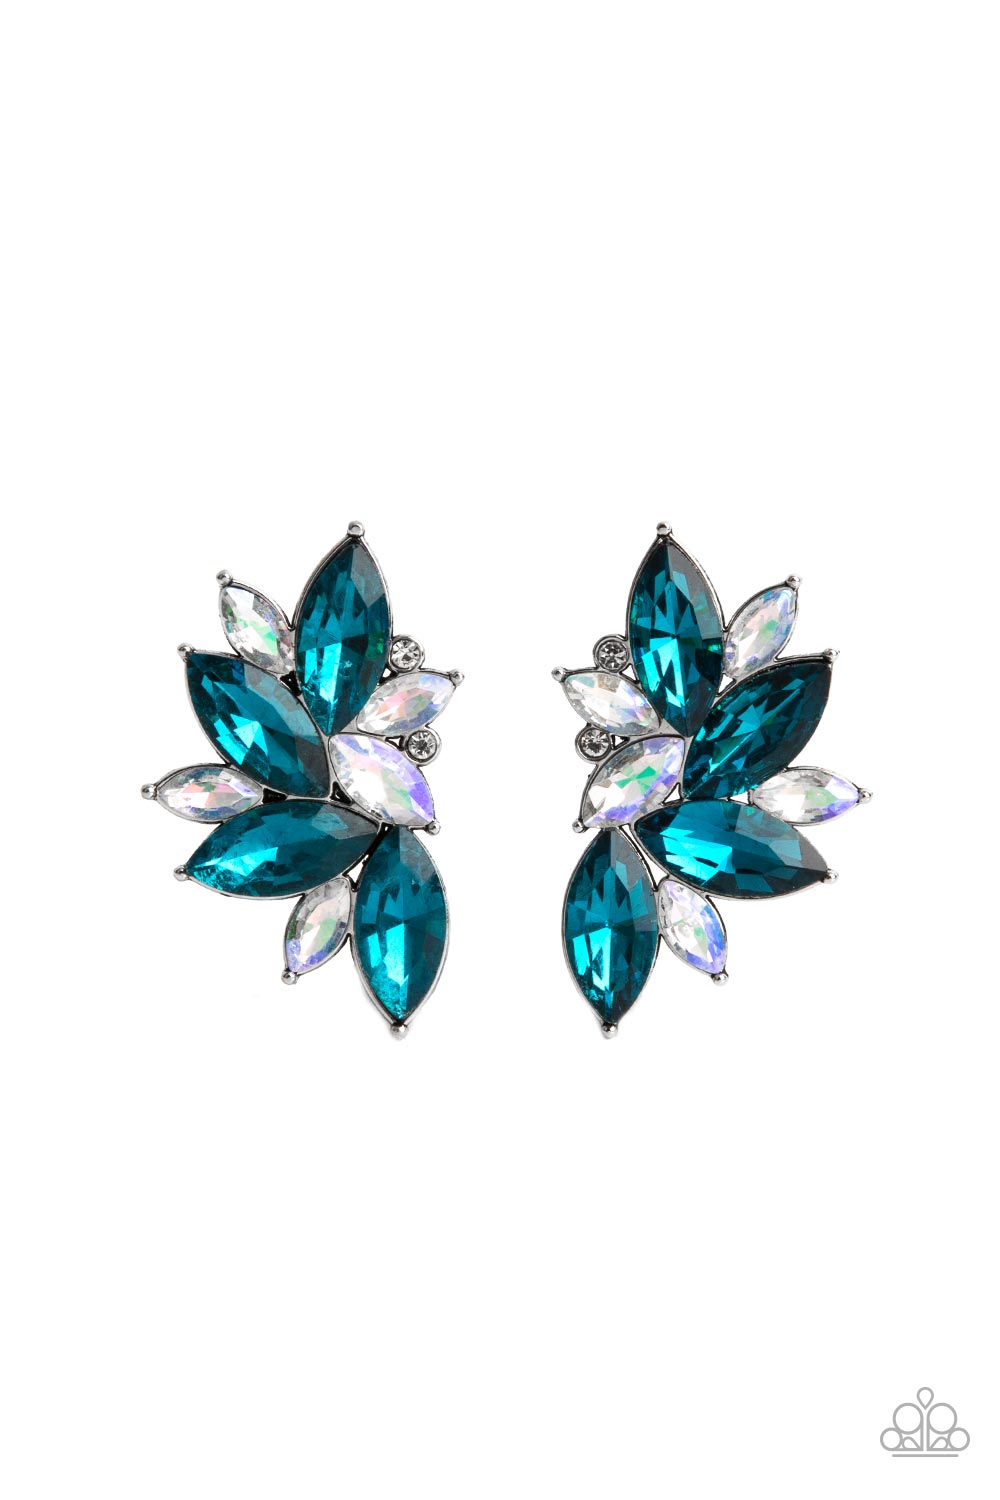 Instant Iridescence Blue Rhinestone Post Earrings - Paparazzi Accessories- lightbox - CarasShop.com - $5 Jewelry by Cara Jewels